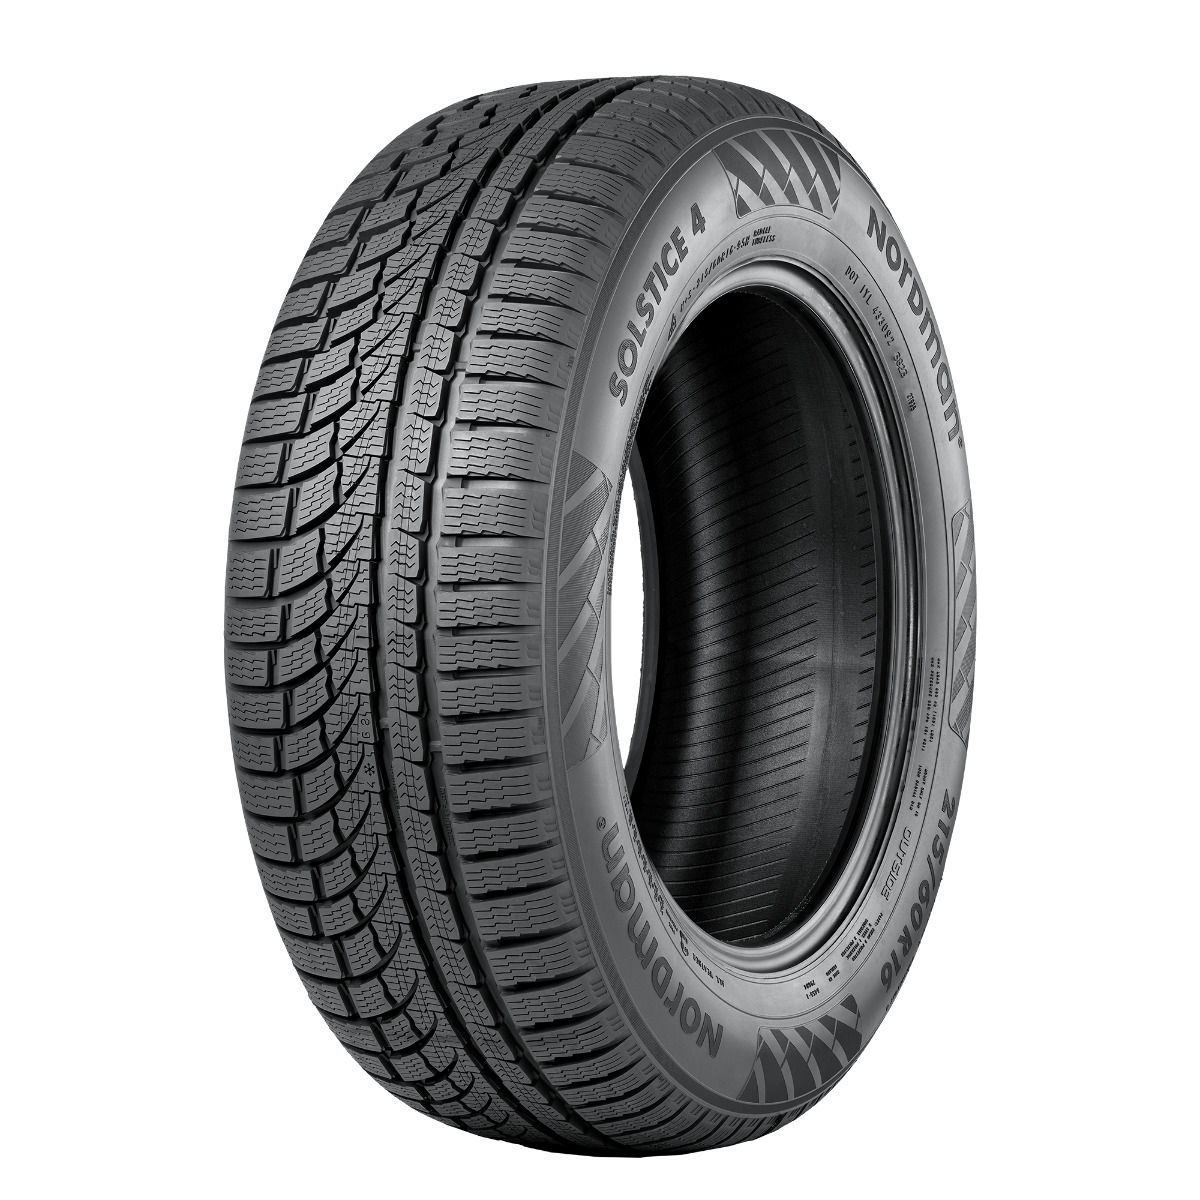 225/60R17 99H Nordman Solstice 4 All-Weather Tire made by Nokian 50K Warranty